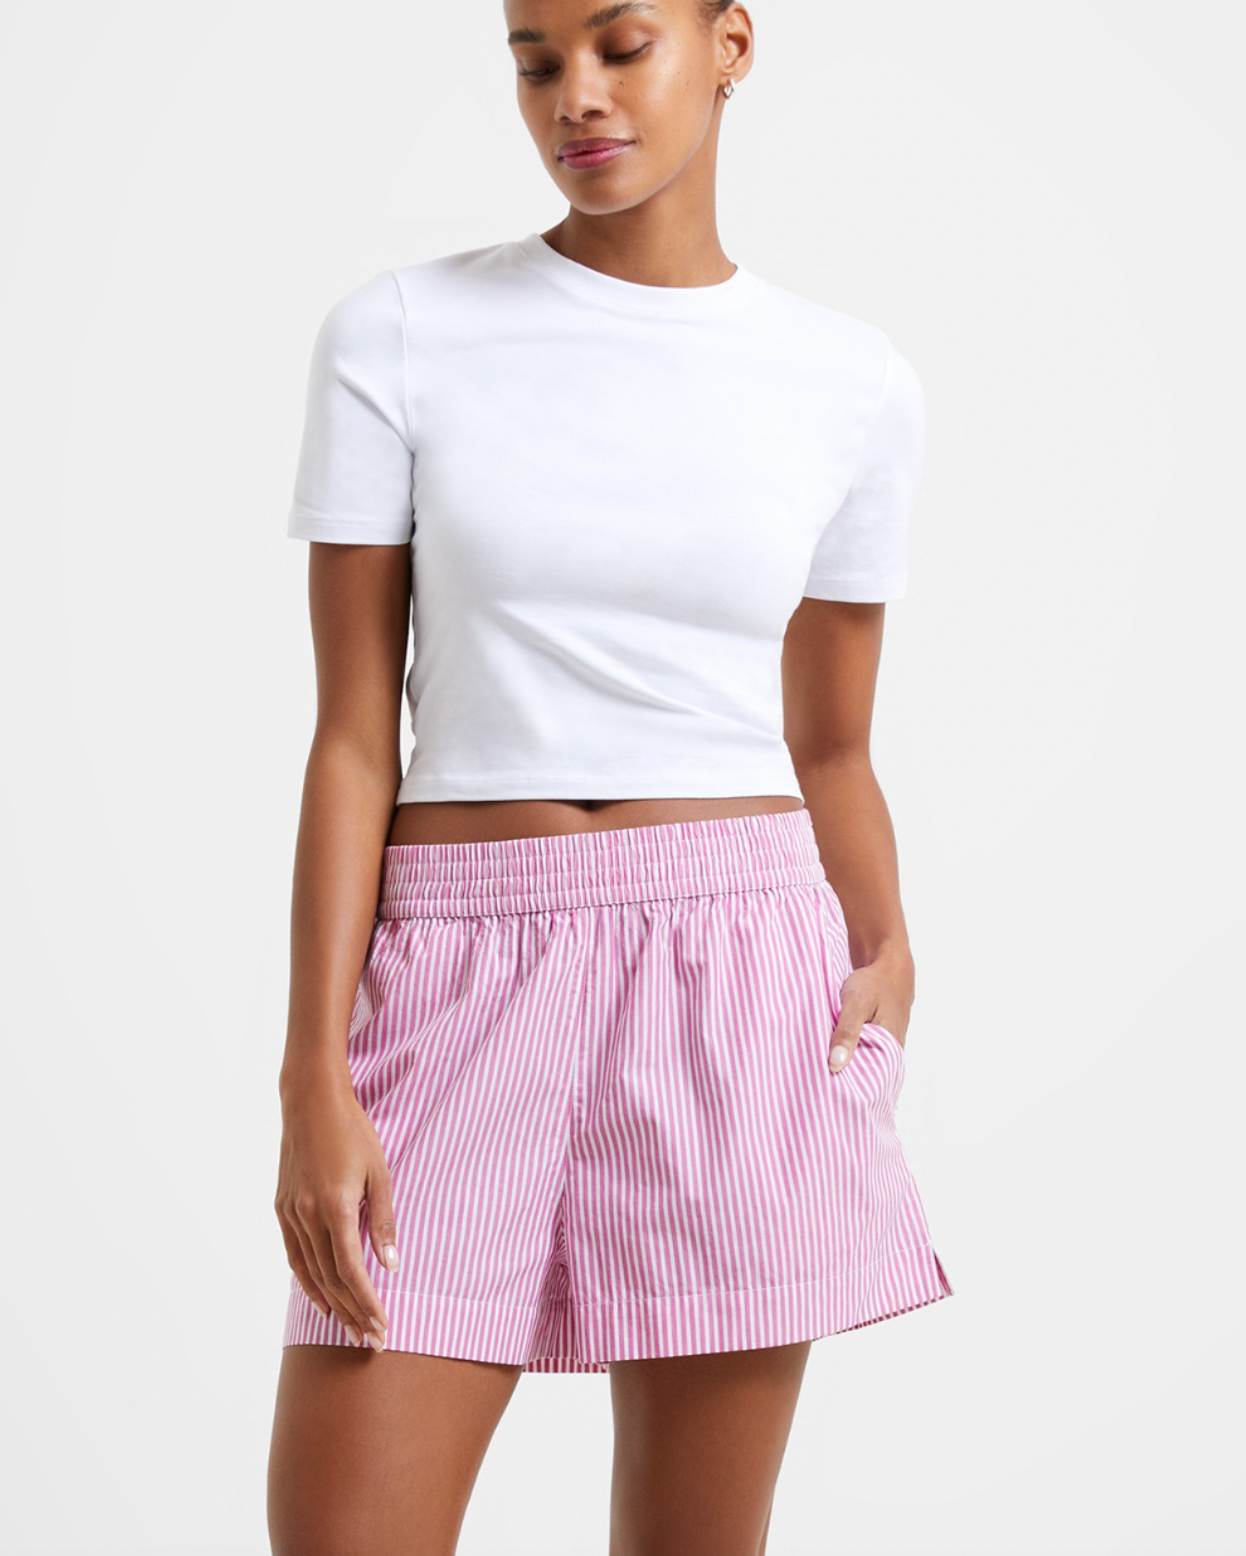 Model wearing French Connection Rhodes Poplin Stripe Shorts in wild rosa with white stripes wearing a white shirt on a white background